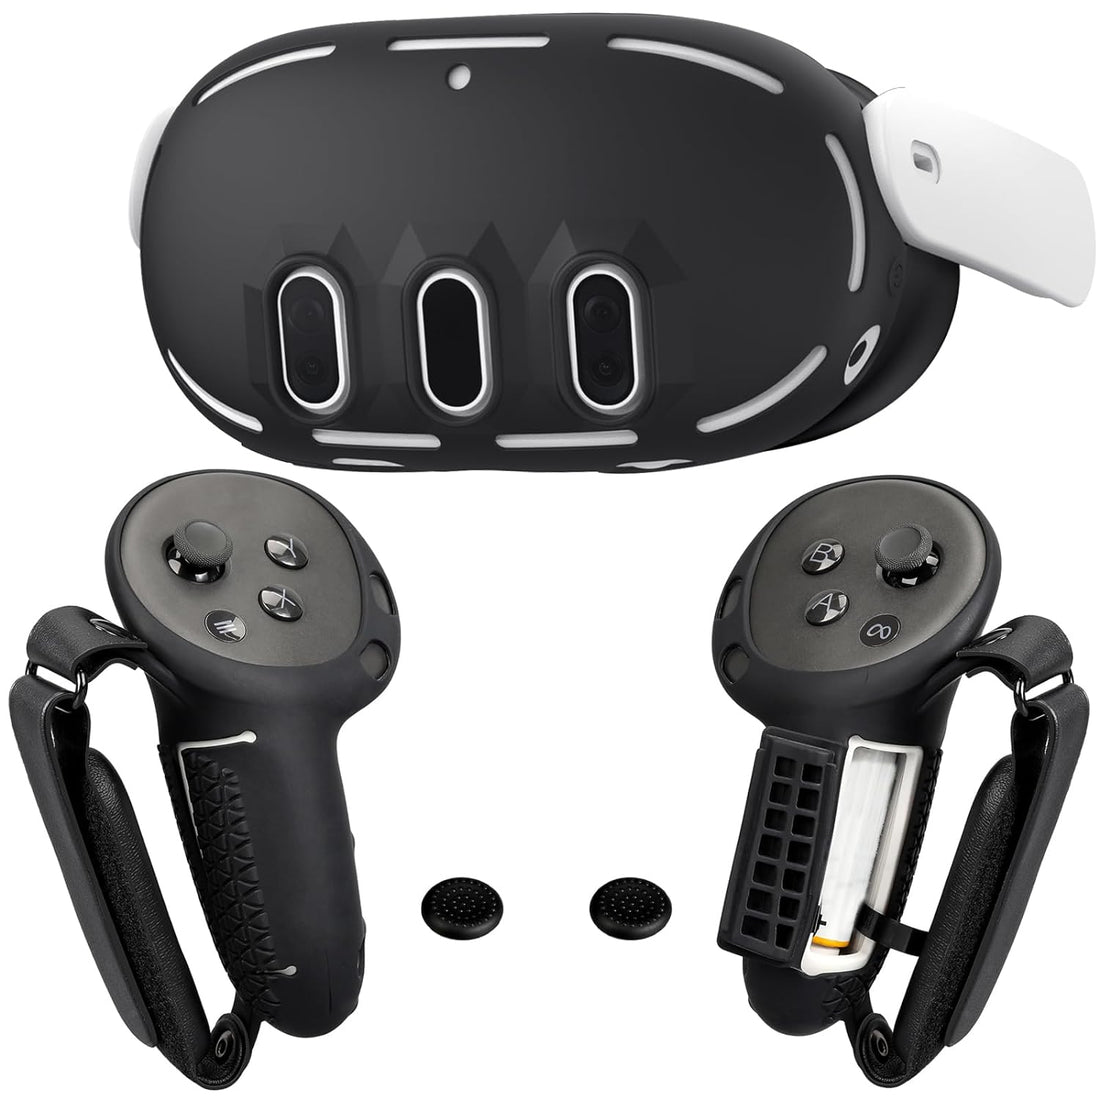 Controller Grips Cover VR Headset Shell Silicone Case Compatible with Meta/Oculus Quest 3 Accessories, Battery Opening Controller Grips Front Shell Headset Cover Skin Protector (Black)